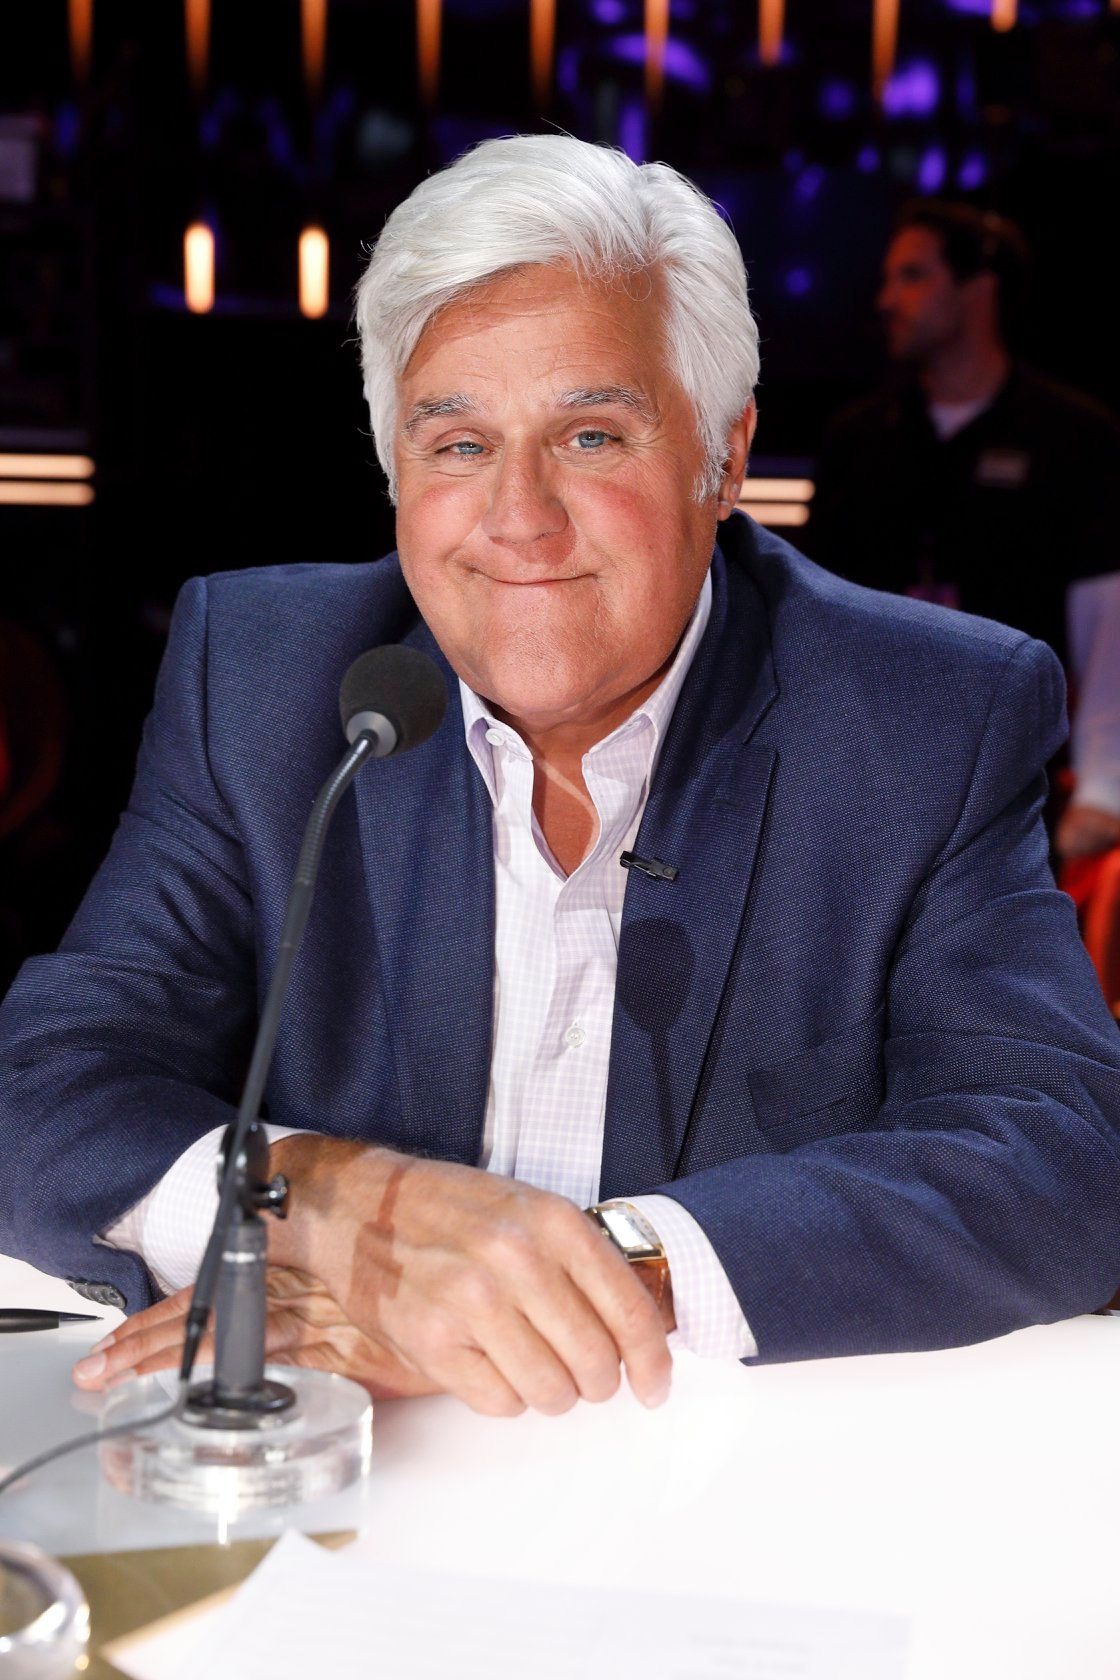 Jay Leno apologizes to Asian Americans for decade of ‘wrong’ jokes